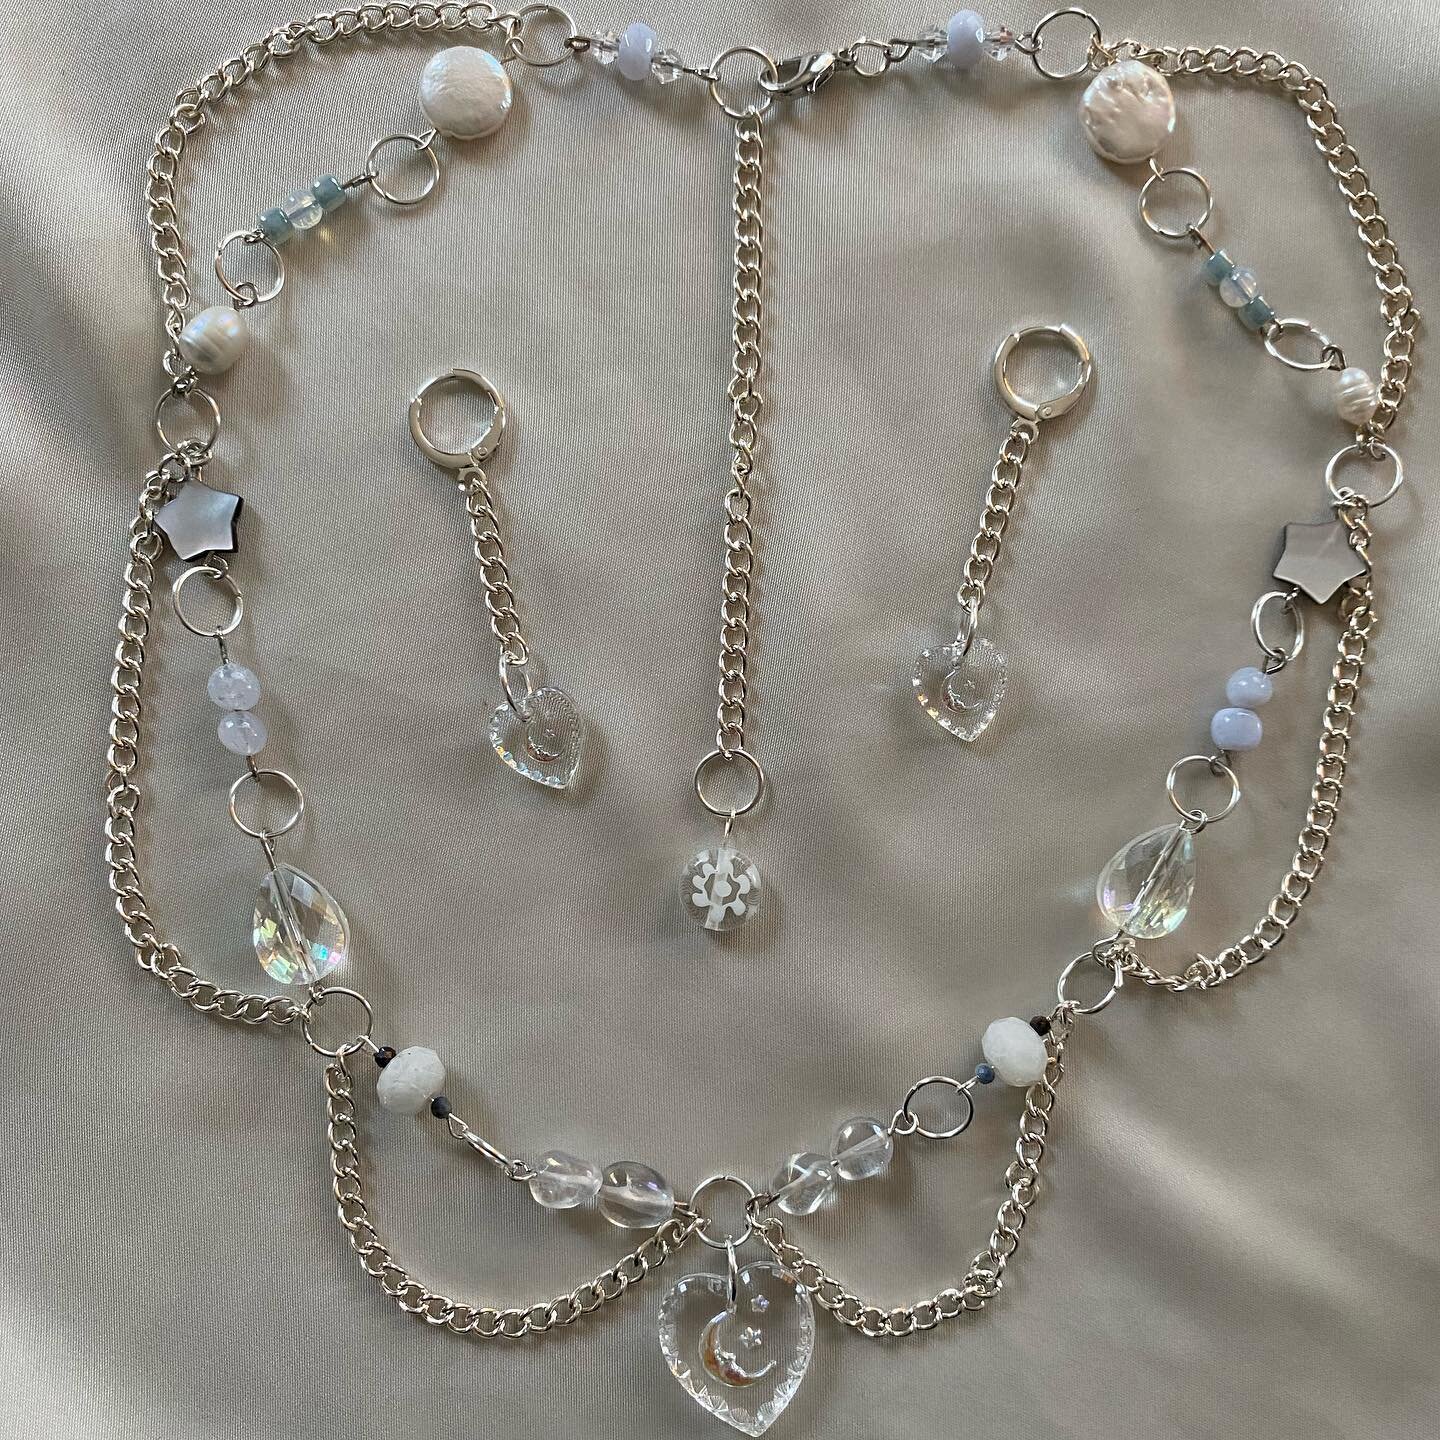 ⭐️400 FOLLOWER G1️⃣VEAWAY TIME ⭐️

very late to this hehe, but try your chances at winning a celestial set! this one is very opalescent and ethereal. the necklace is made with real gemstones, czech glass, and has chain embellishments - the earrings f